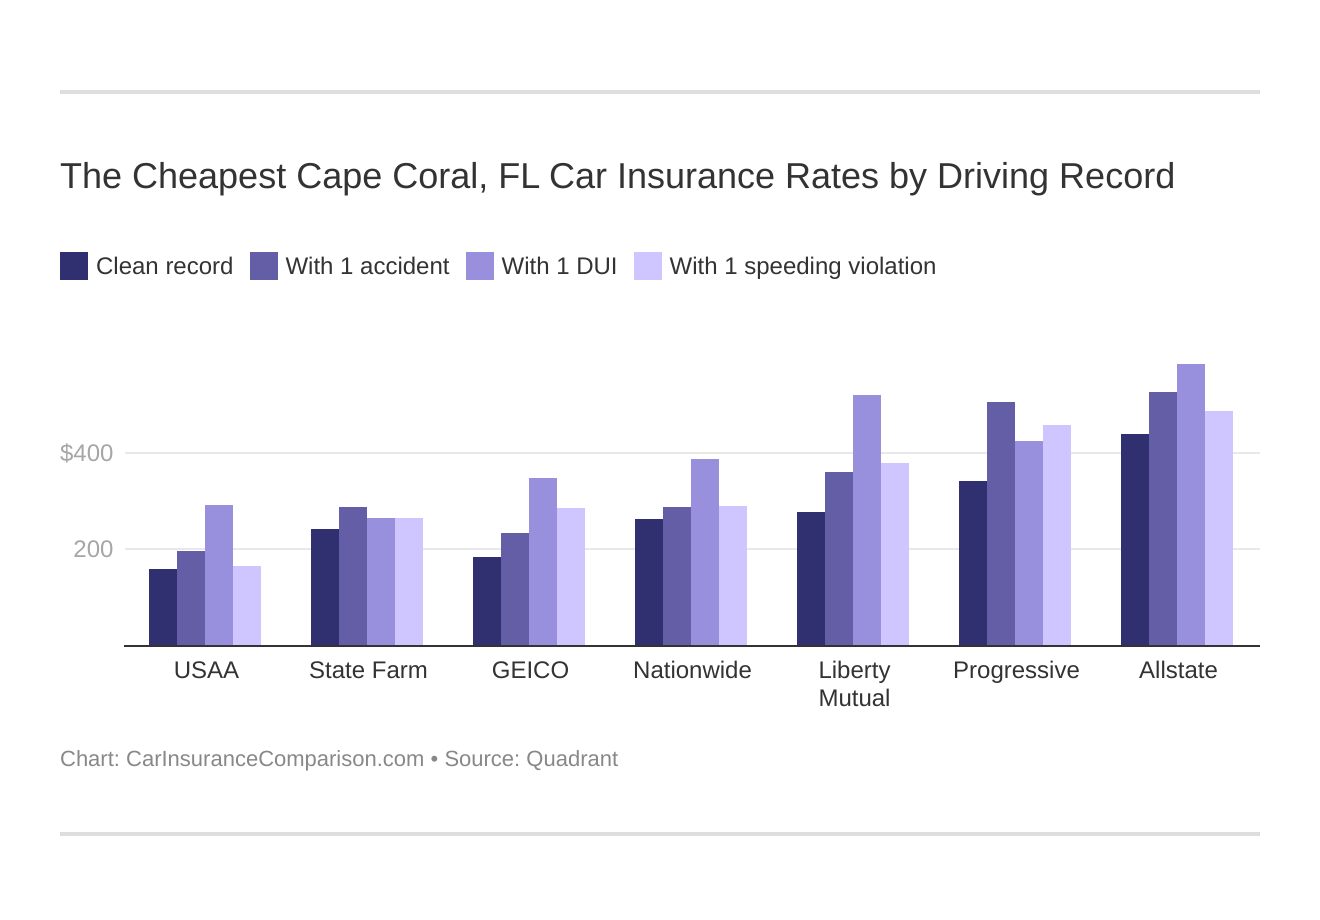 The Cheapest Cape Coral, FL Car Insurance Rates by Driving Record